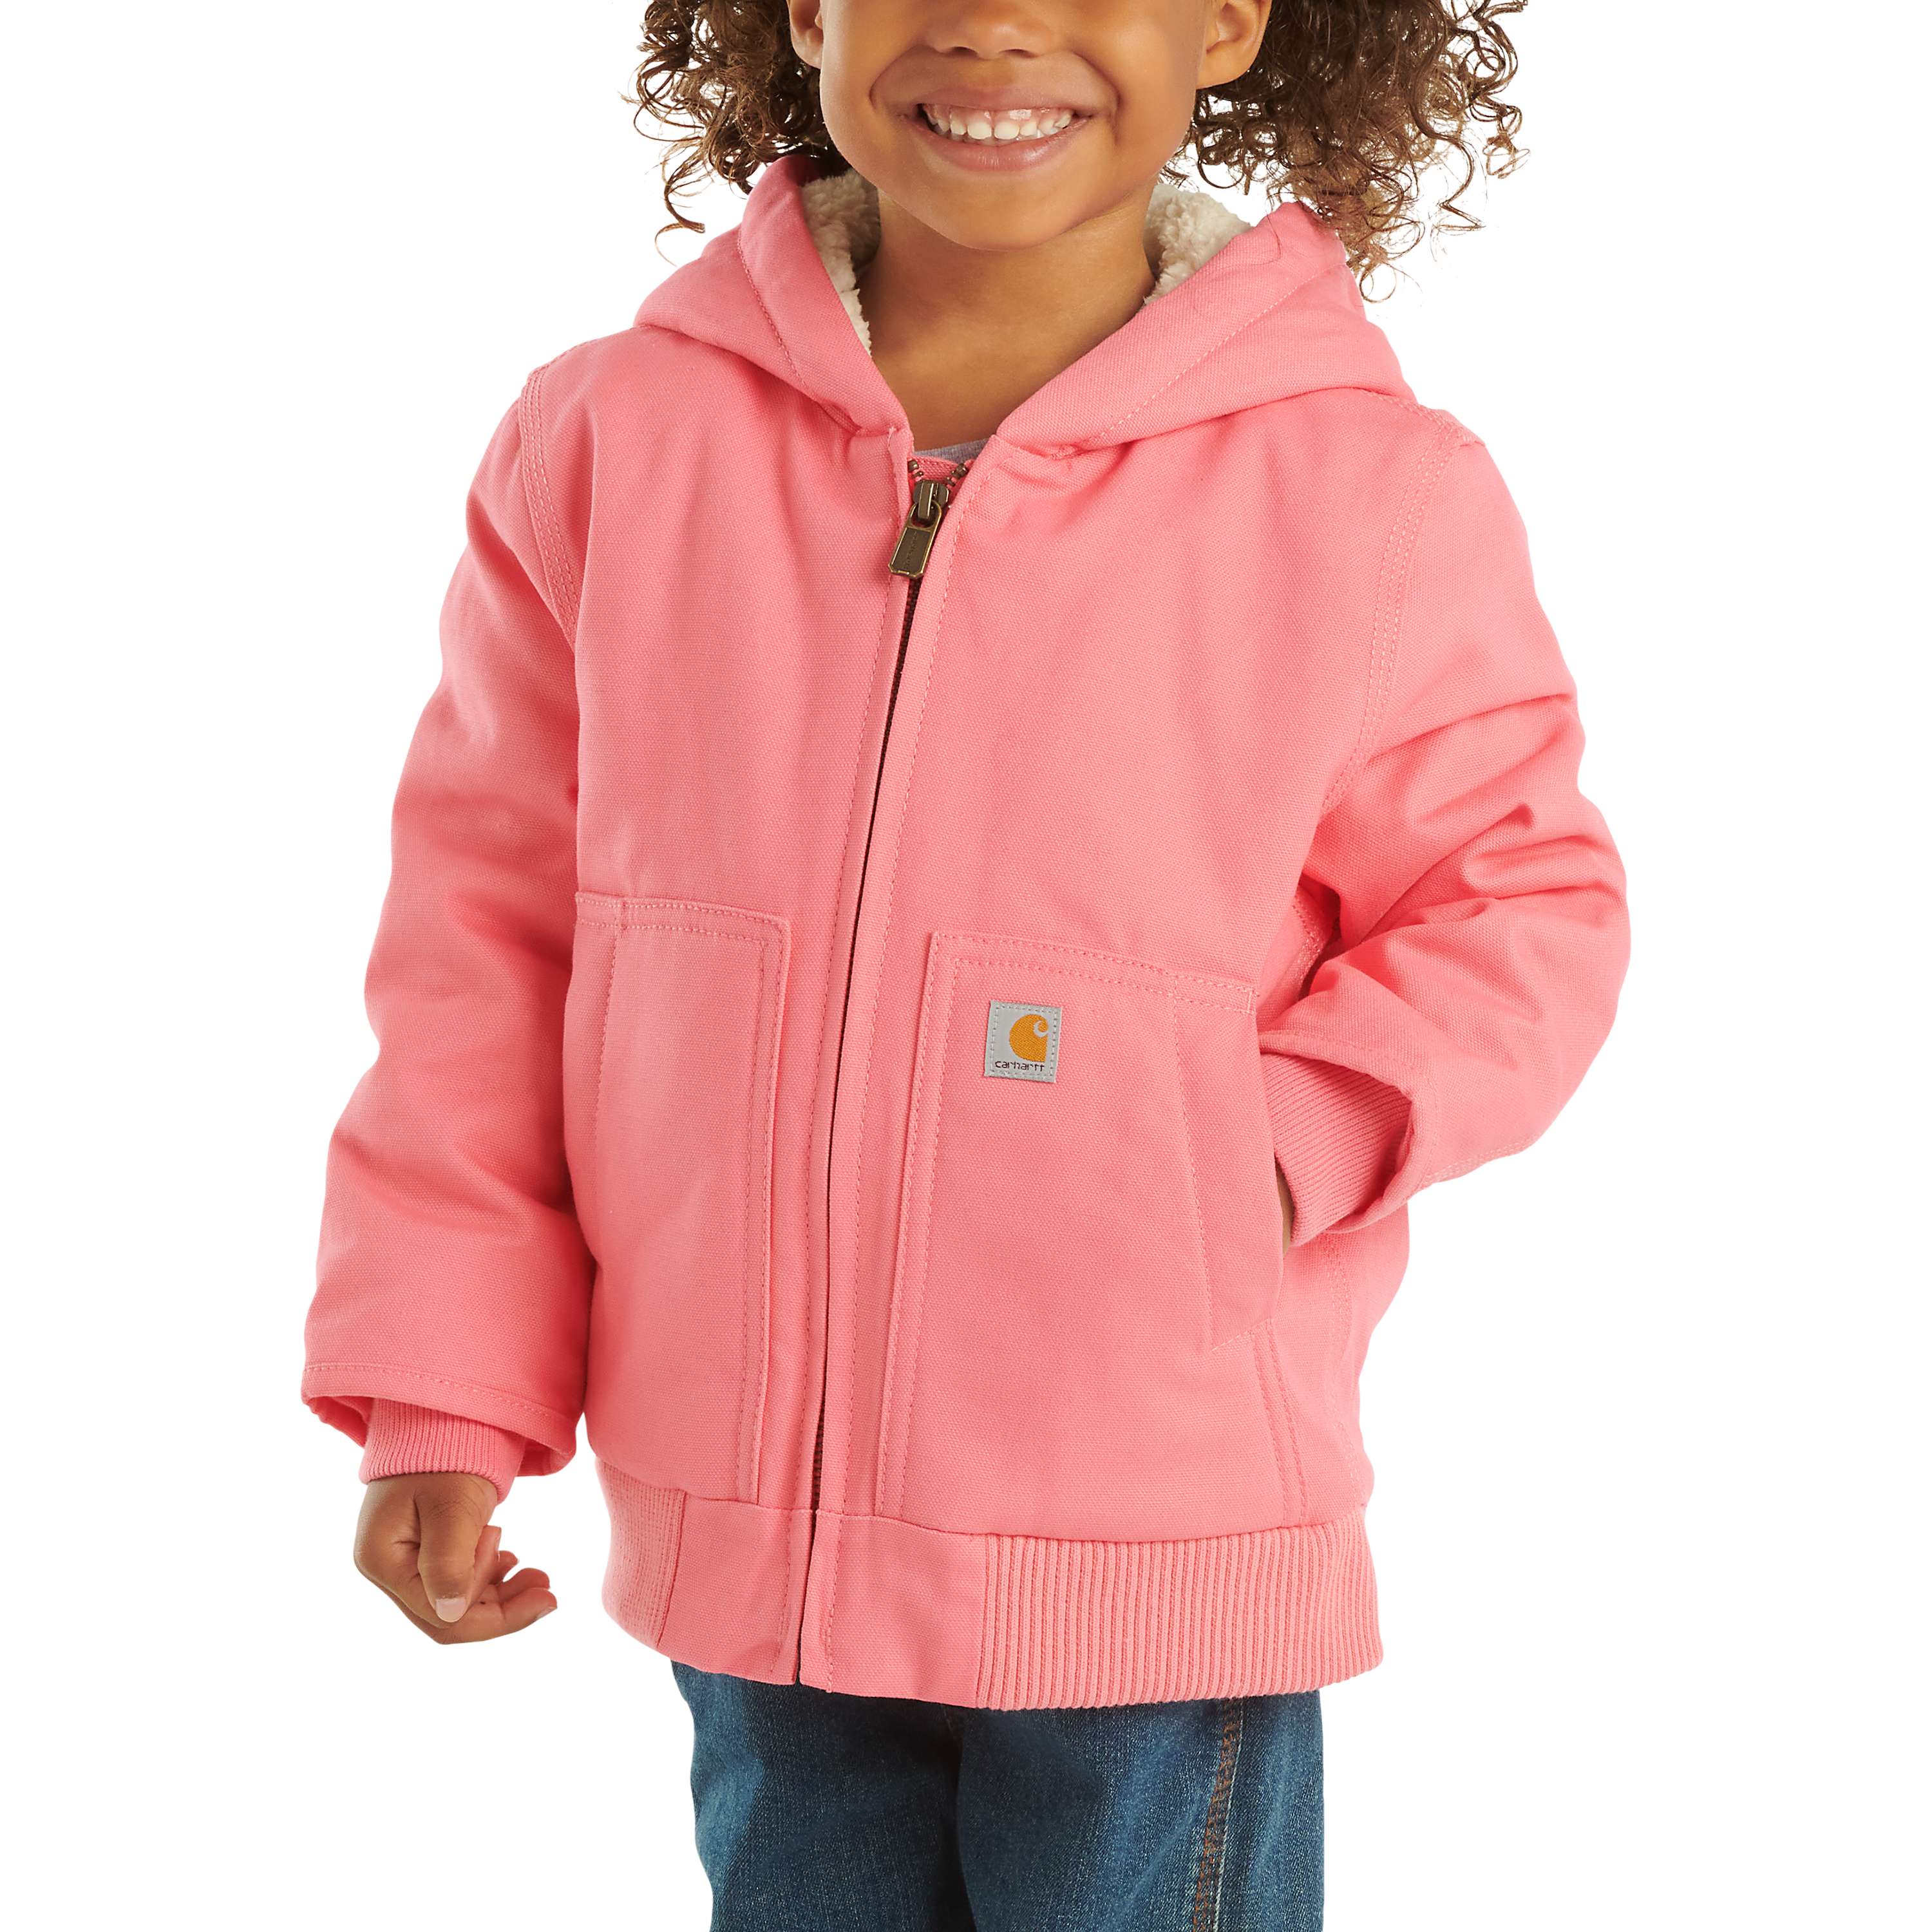 Girls' Zip Front Canvas Insulated Hooded Active Jac (Infant/Toddler)